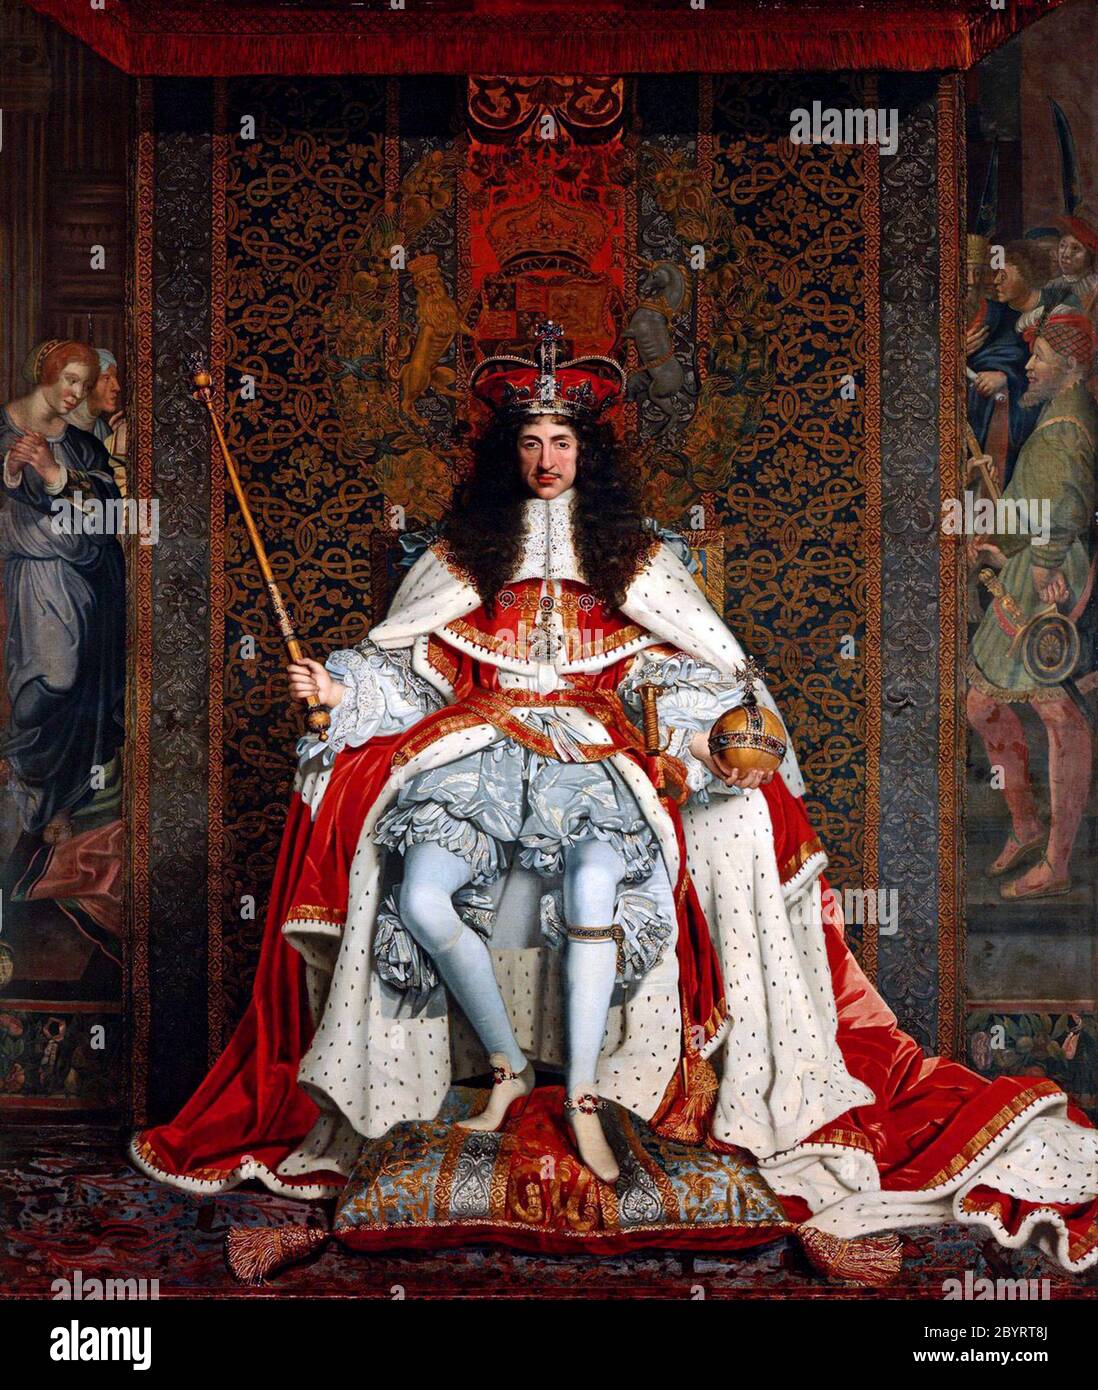 King Charles II, Coronation portrait: Charles was crowned at Westminster Abbey on 23 April 1661 by John Michael Wright. Charles II (1630 – 1685) king of England, Scotland, and Ireland. He was king of Scotland from 1649 until his deposition in 1651, and king of England, Scotland and Ireland from the 1660 Restoration of the monarchy until his death in 1685. Stock Photo